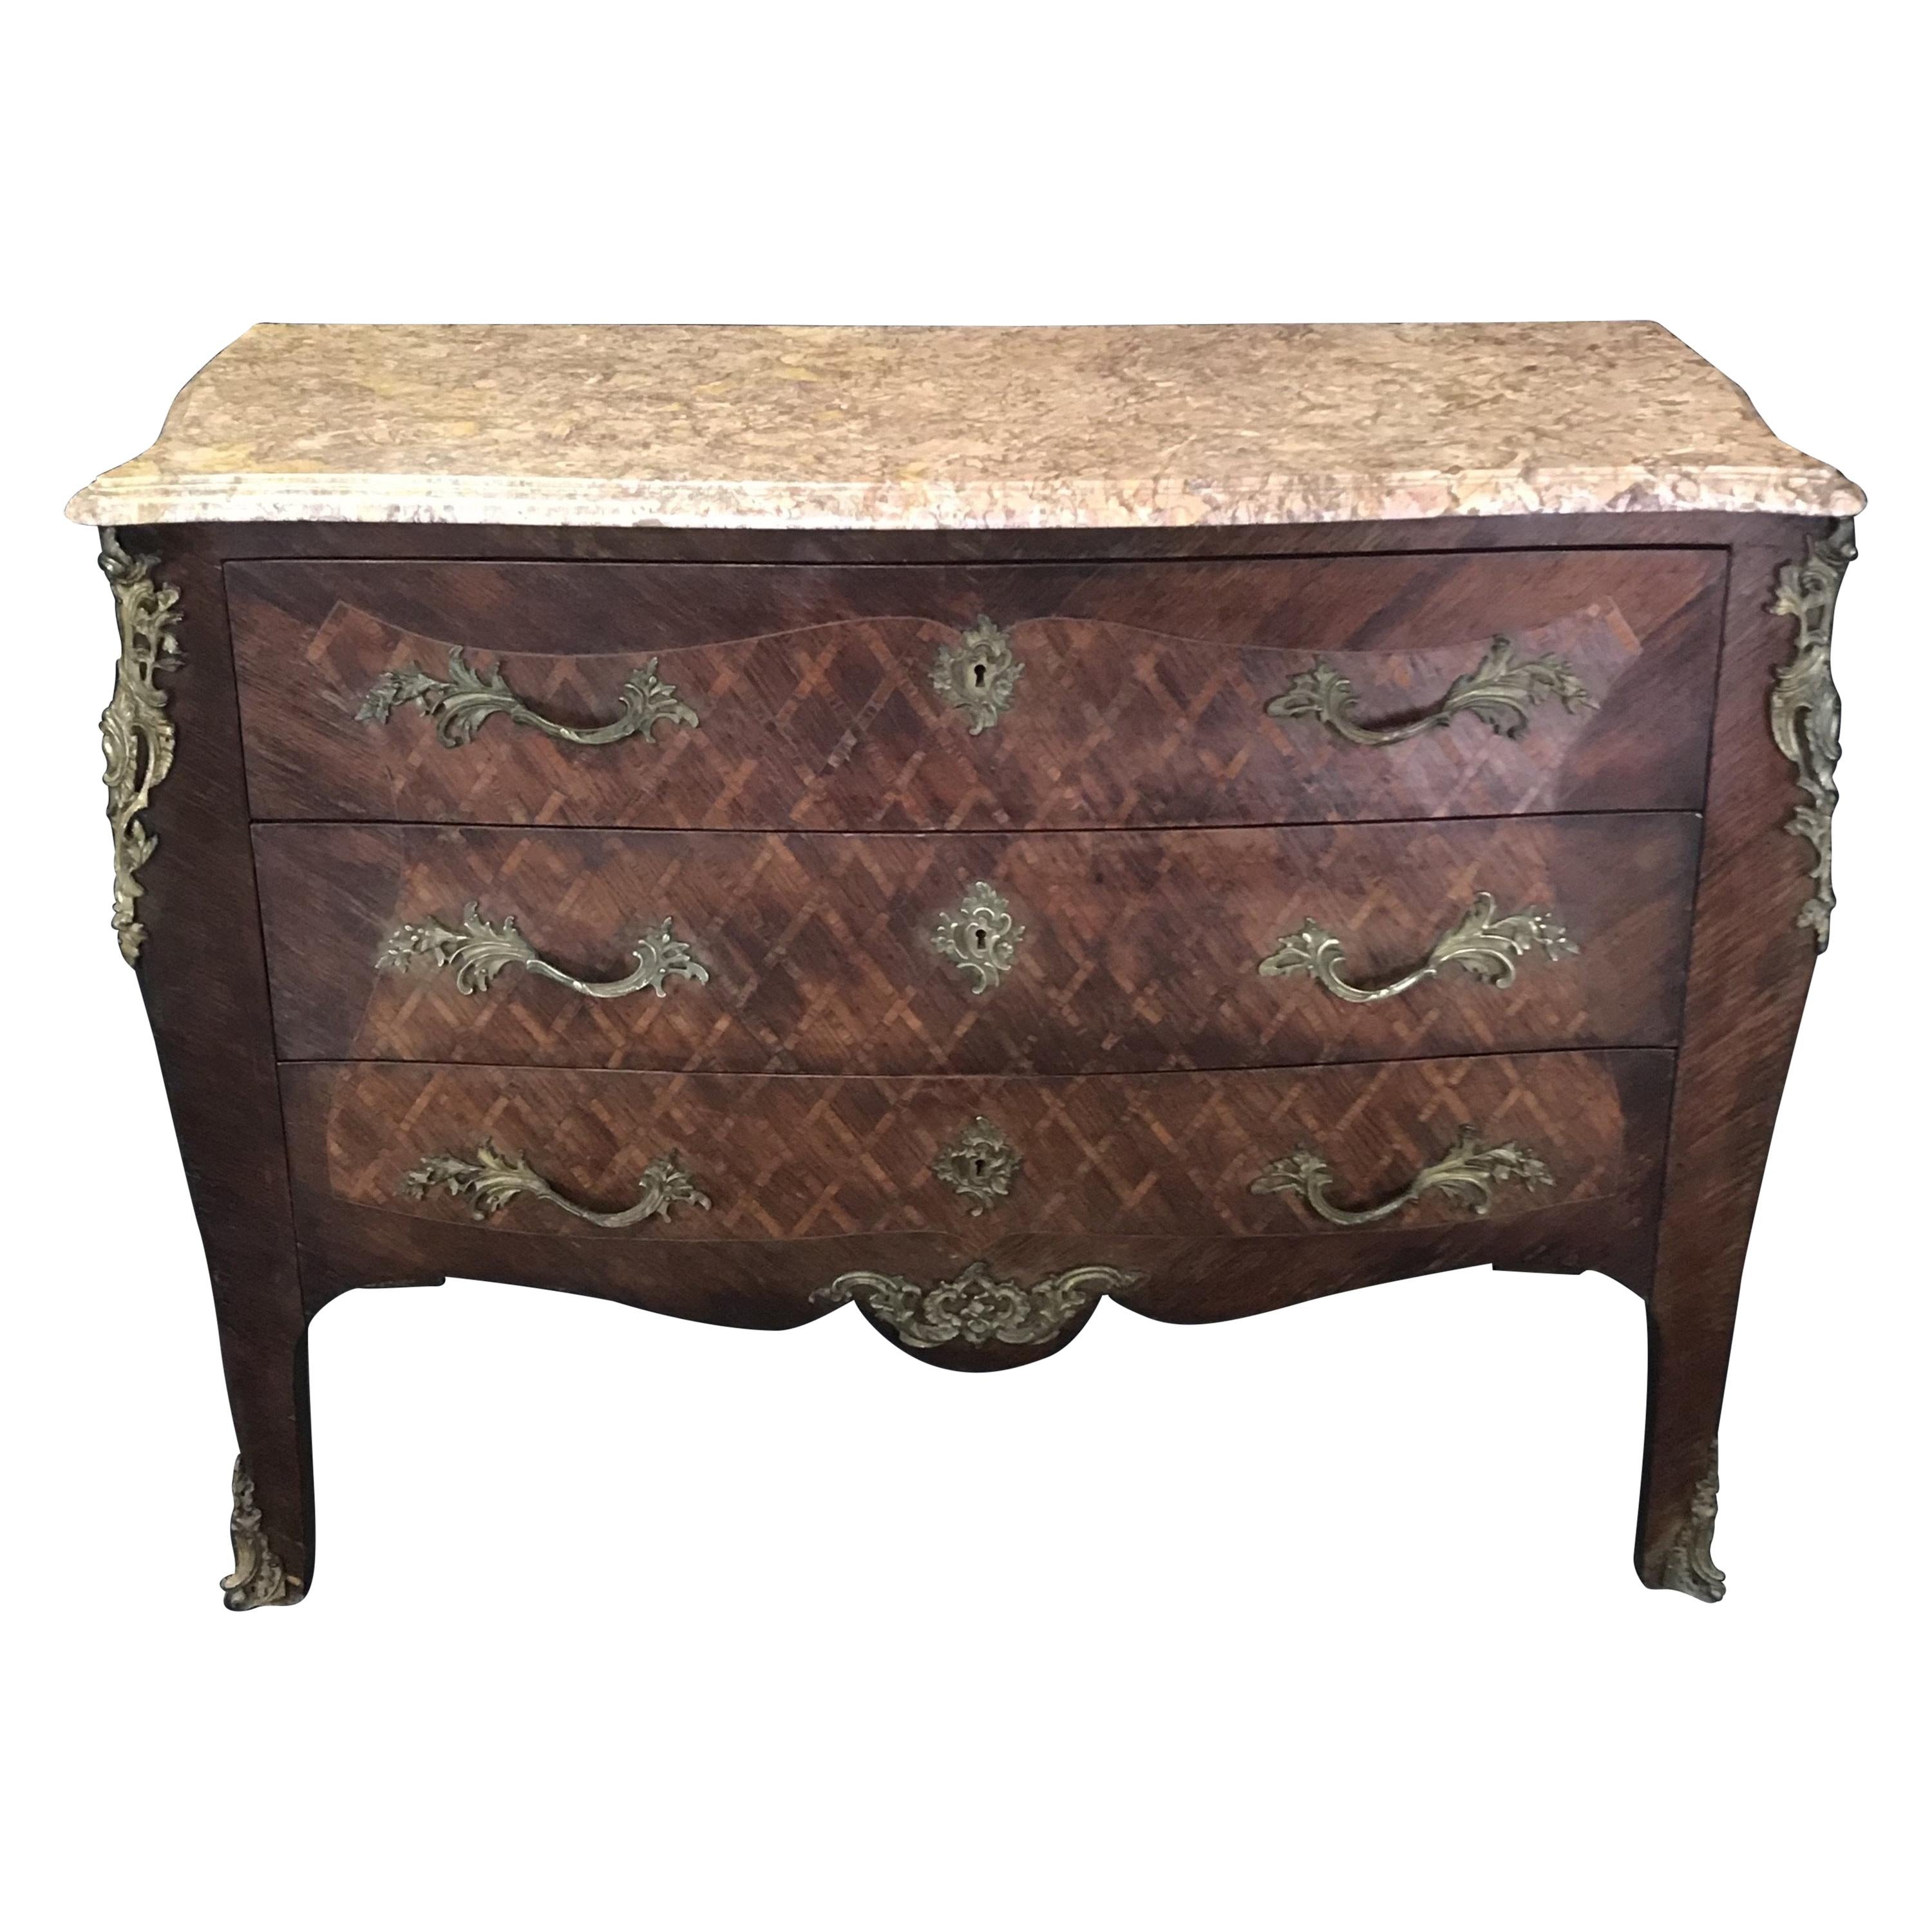 Antique French Louis XV Diamond Marquetry Commode Chest of Drawers For Sale